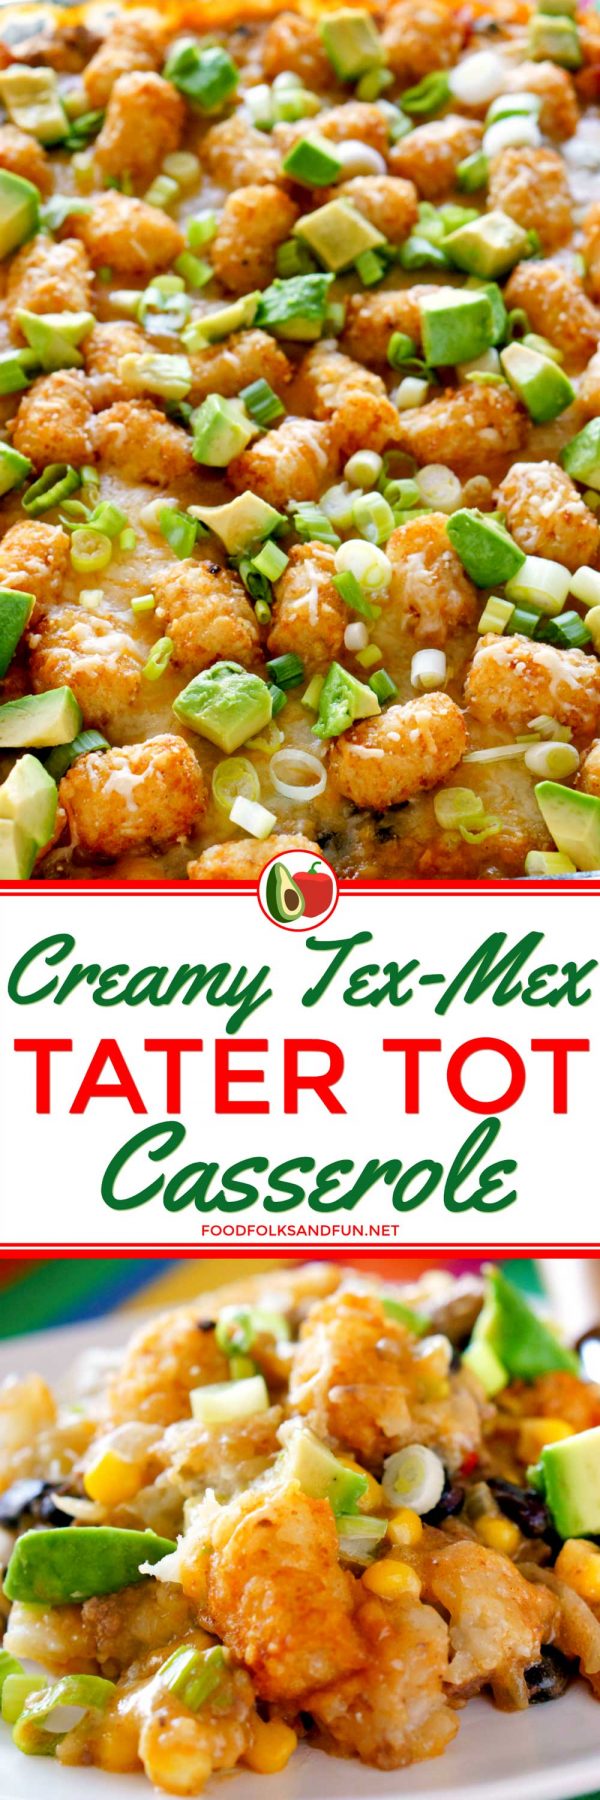 Cheesy Tater Tot Casserole made with Tex-Mex flavors.